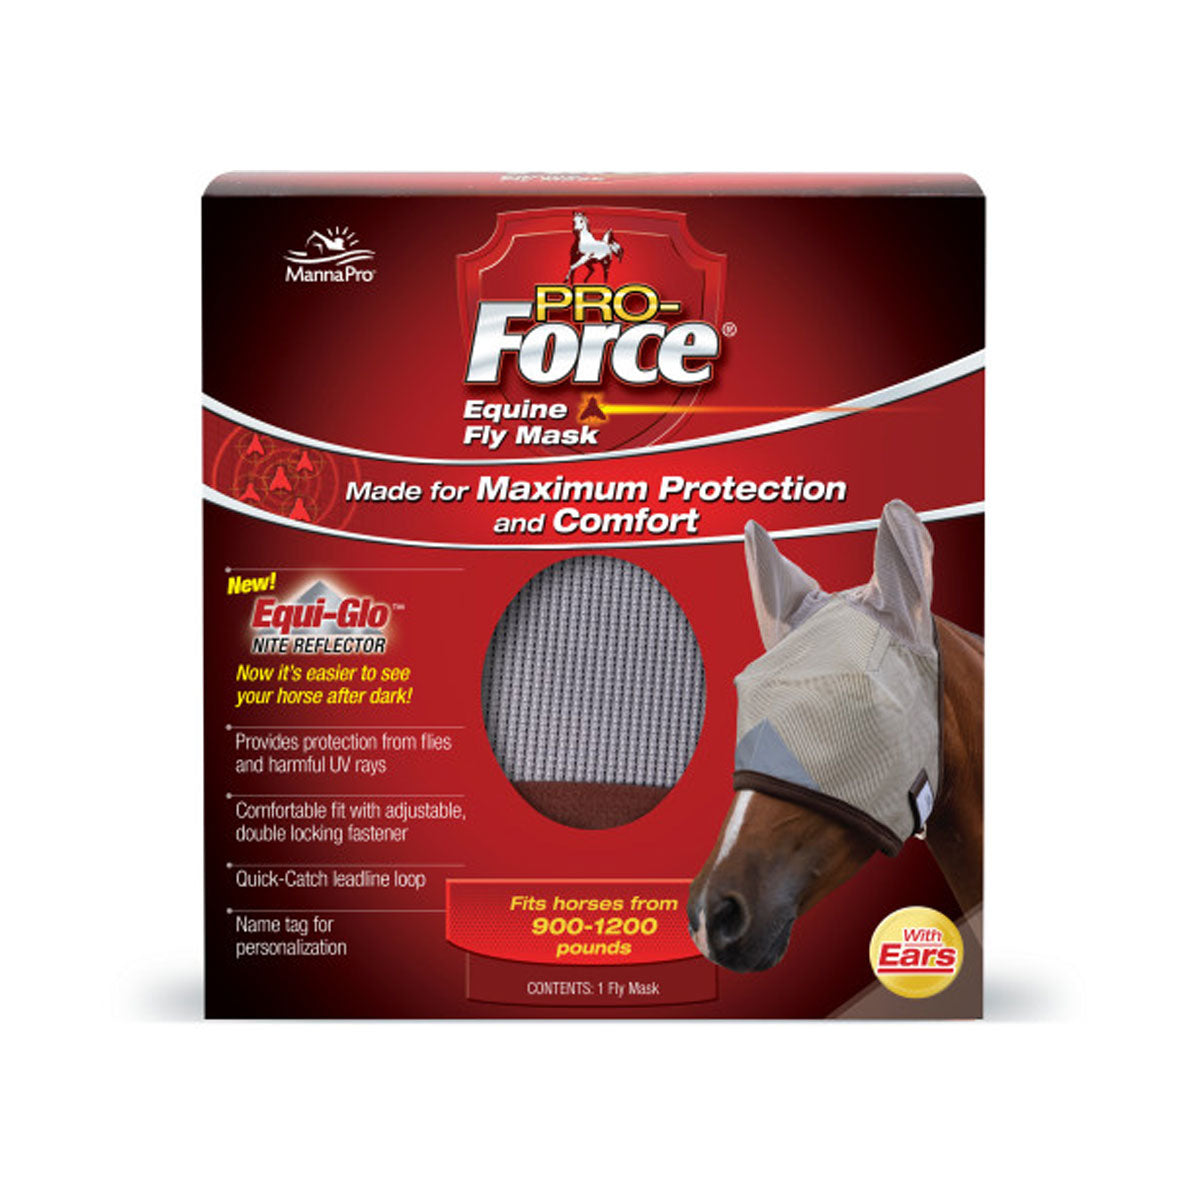 Manna Pro Force Fly Mask With Ears